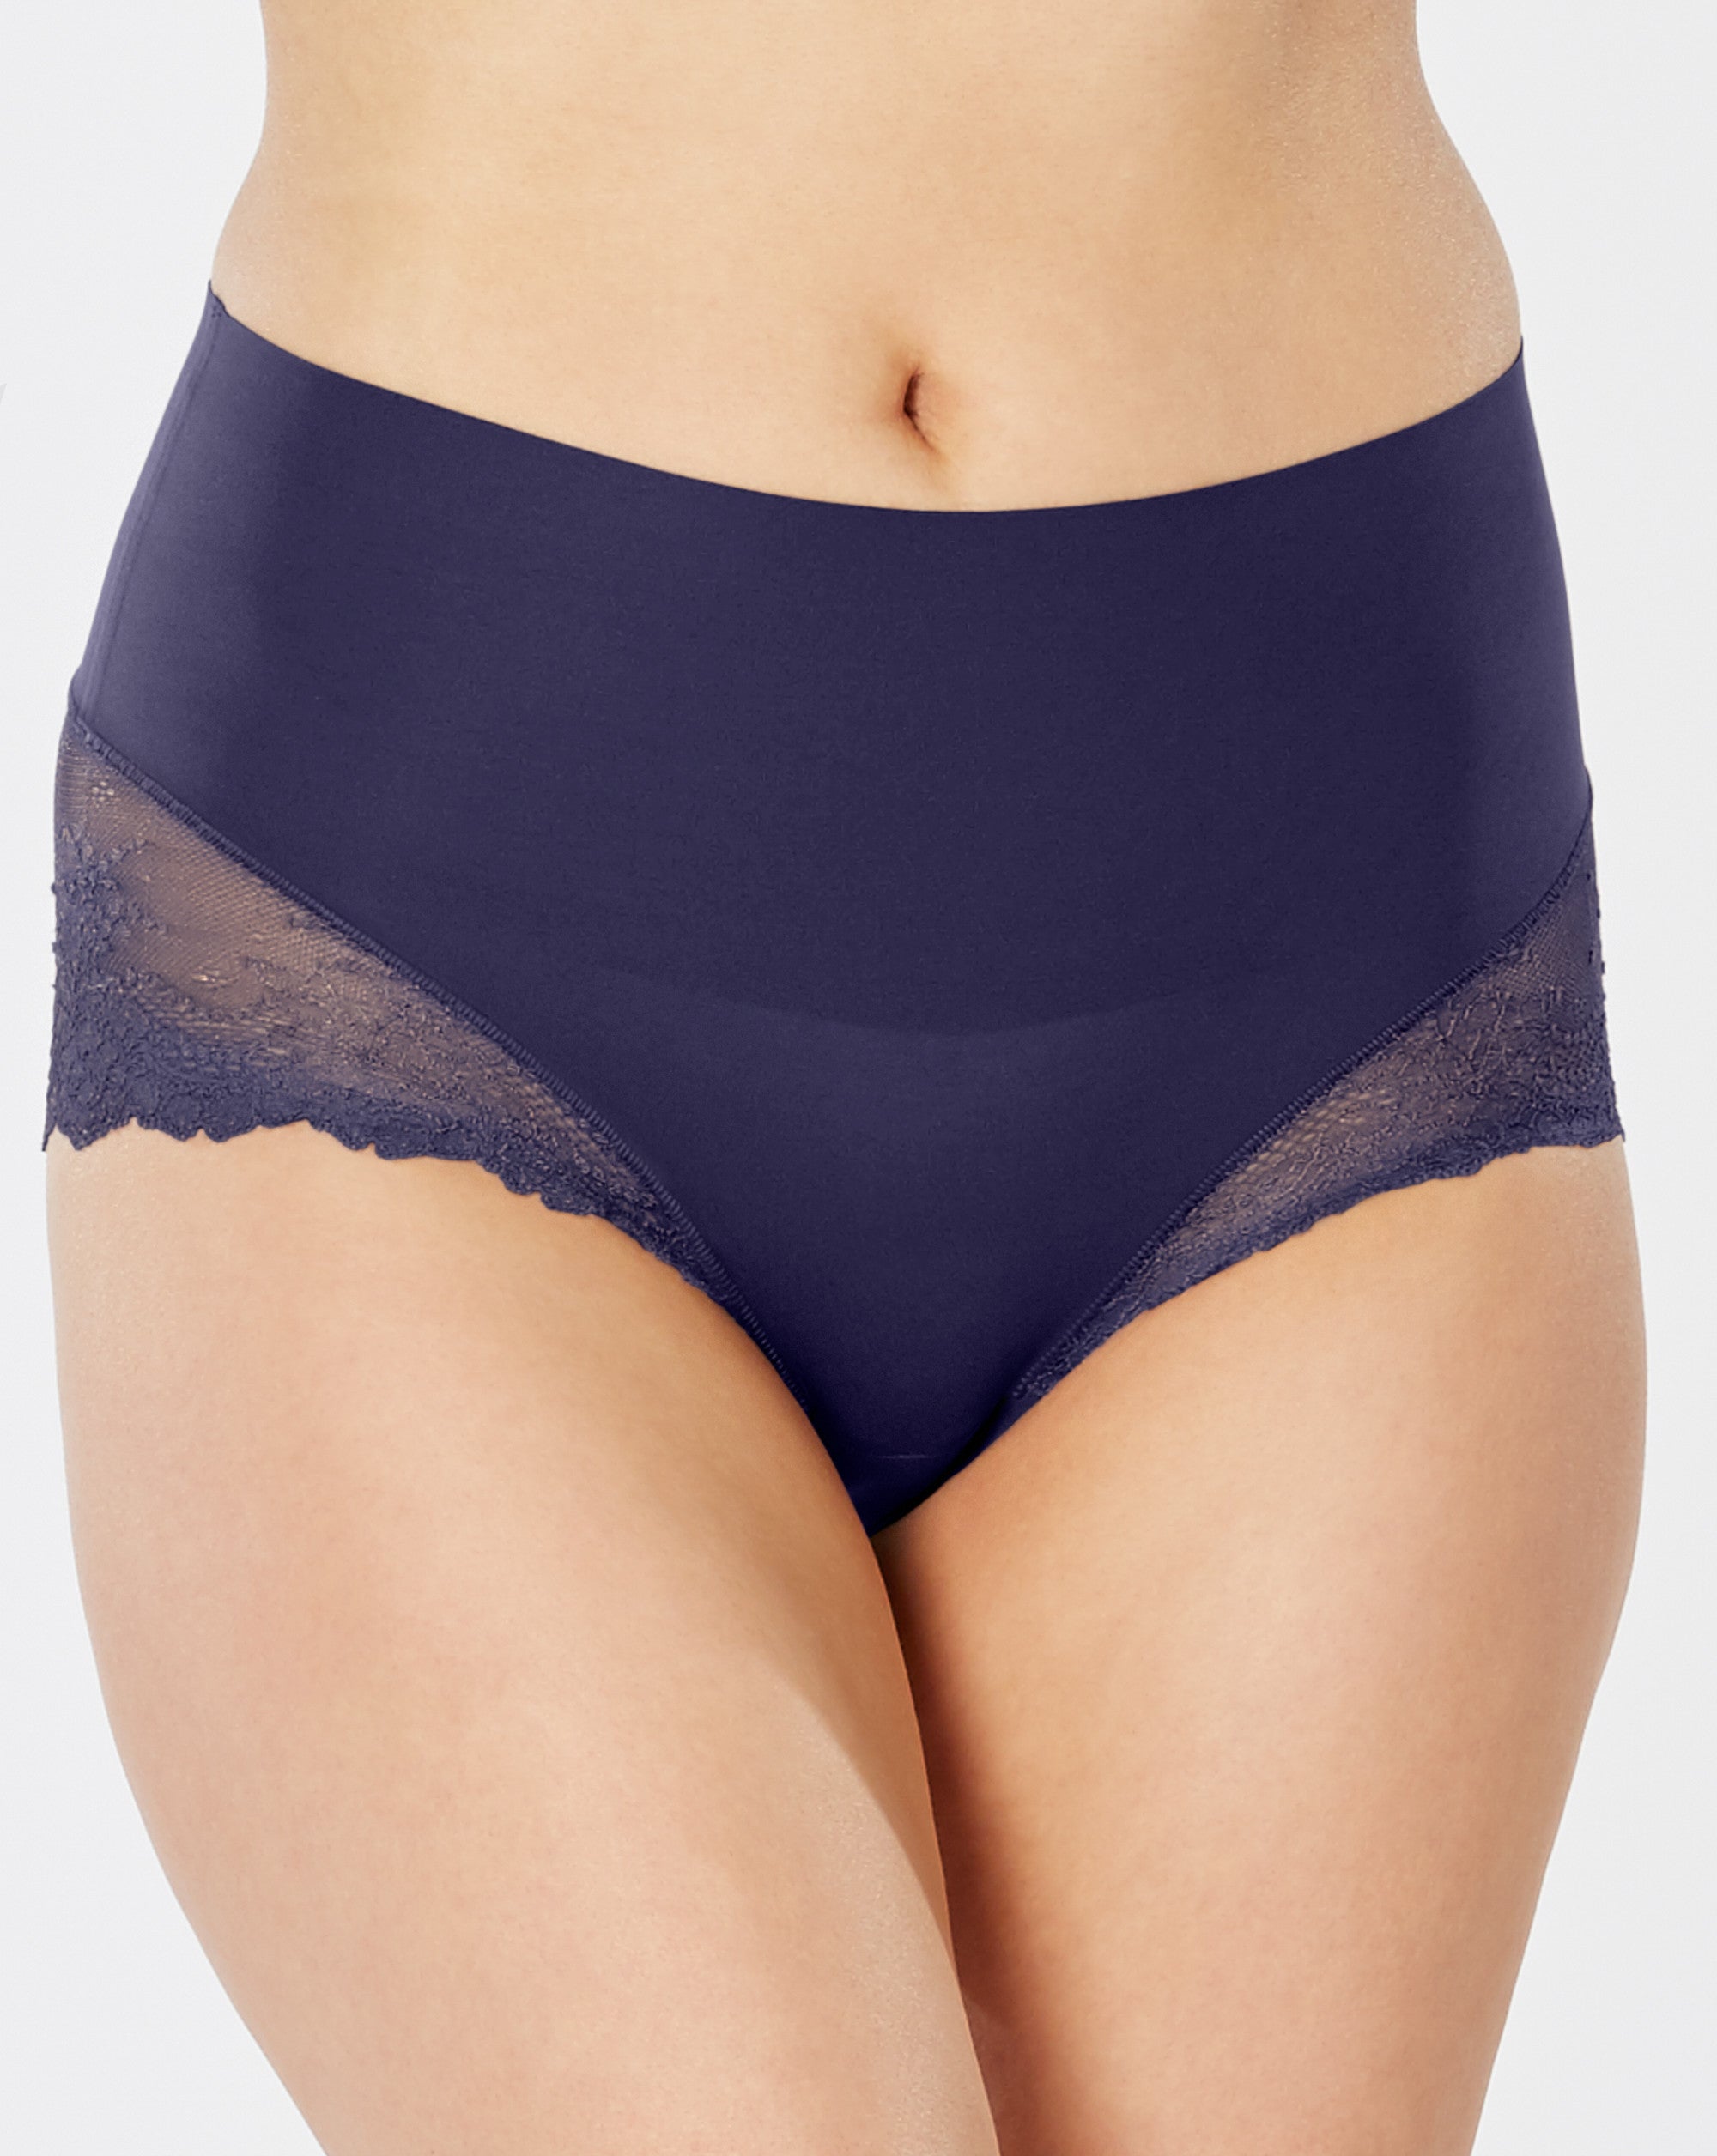 SPANX, Undie-tectable Lace Hi-Hipster Panty, Cafe Au Lait, XS at